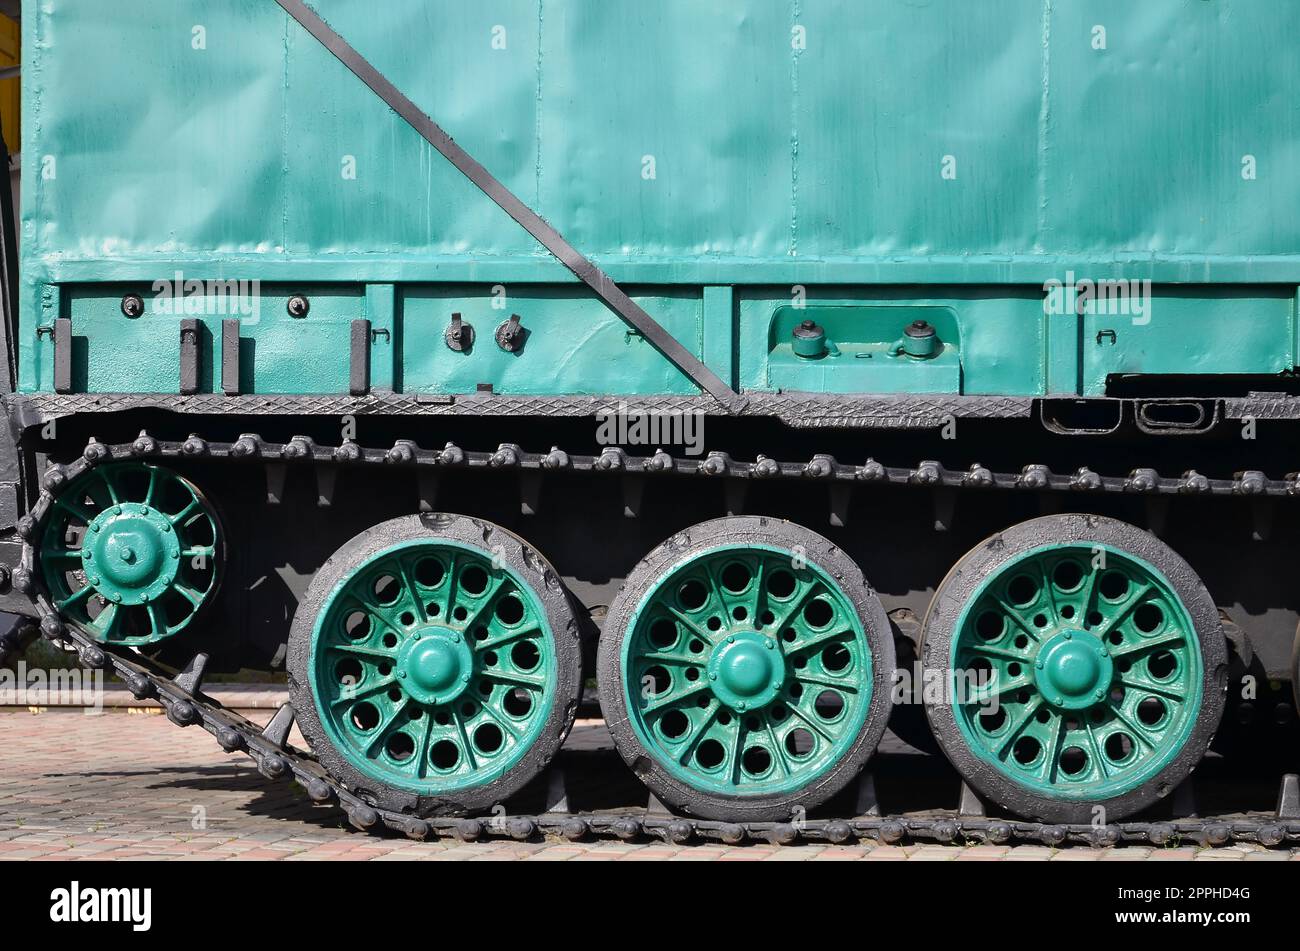 Side view of the vehicle on a caterpillar track with black tracks and green wheels and a side metal wall Stock Photo